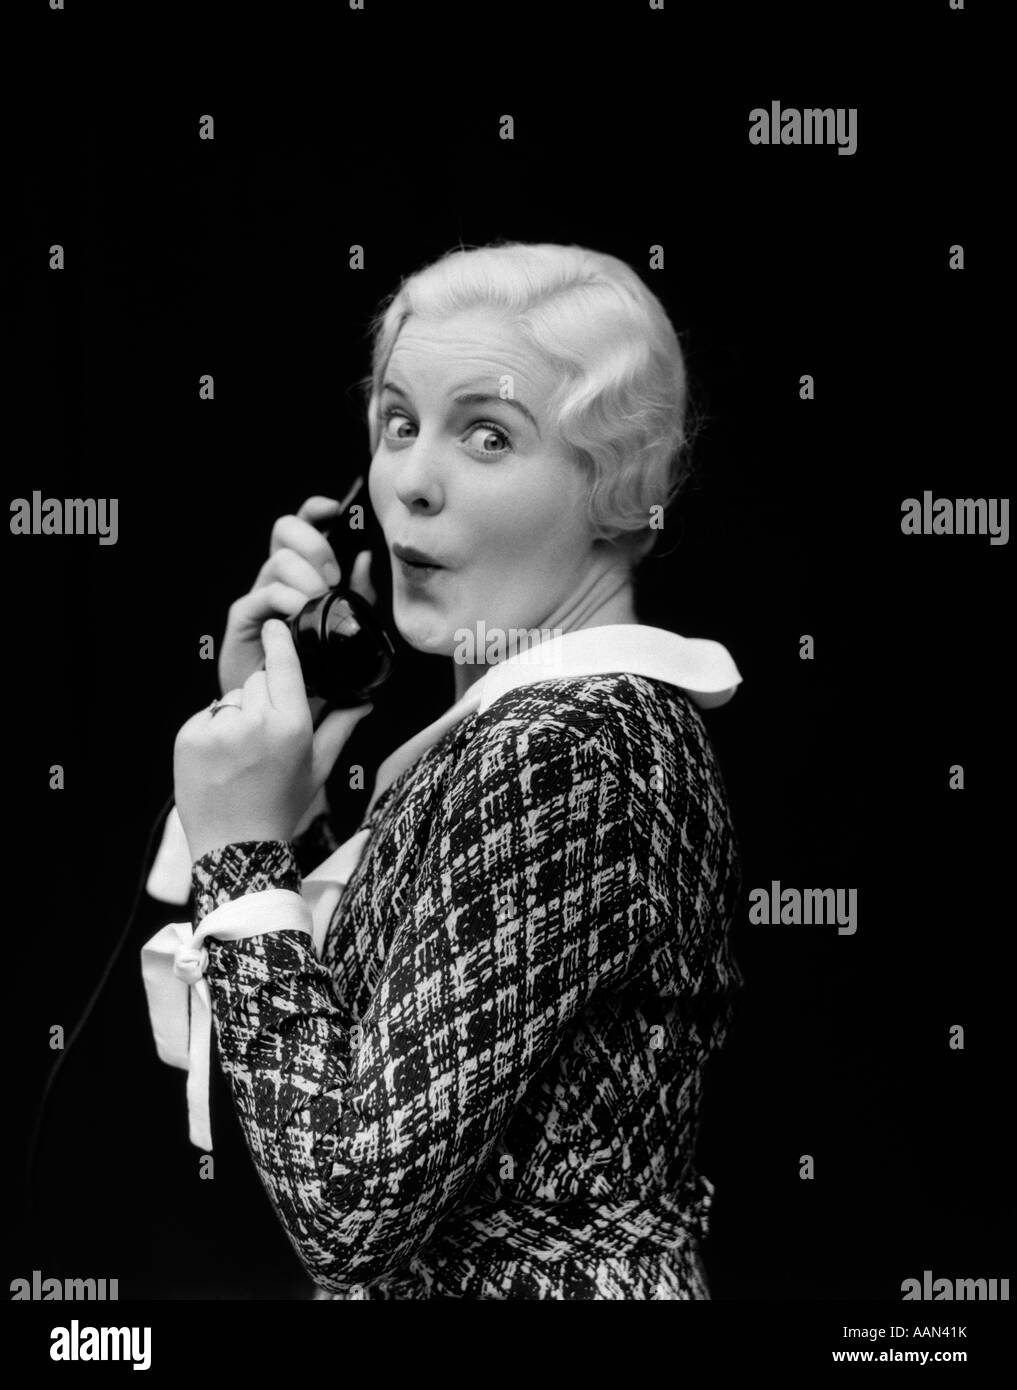 1930s WOMAN TALKING ON TELEPHONE SURPRISED EXPRESSION ON FACE LOOKING AT CAMERA Stock Photo